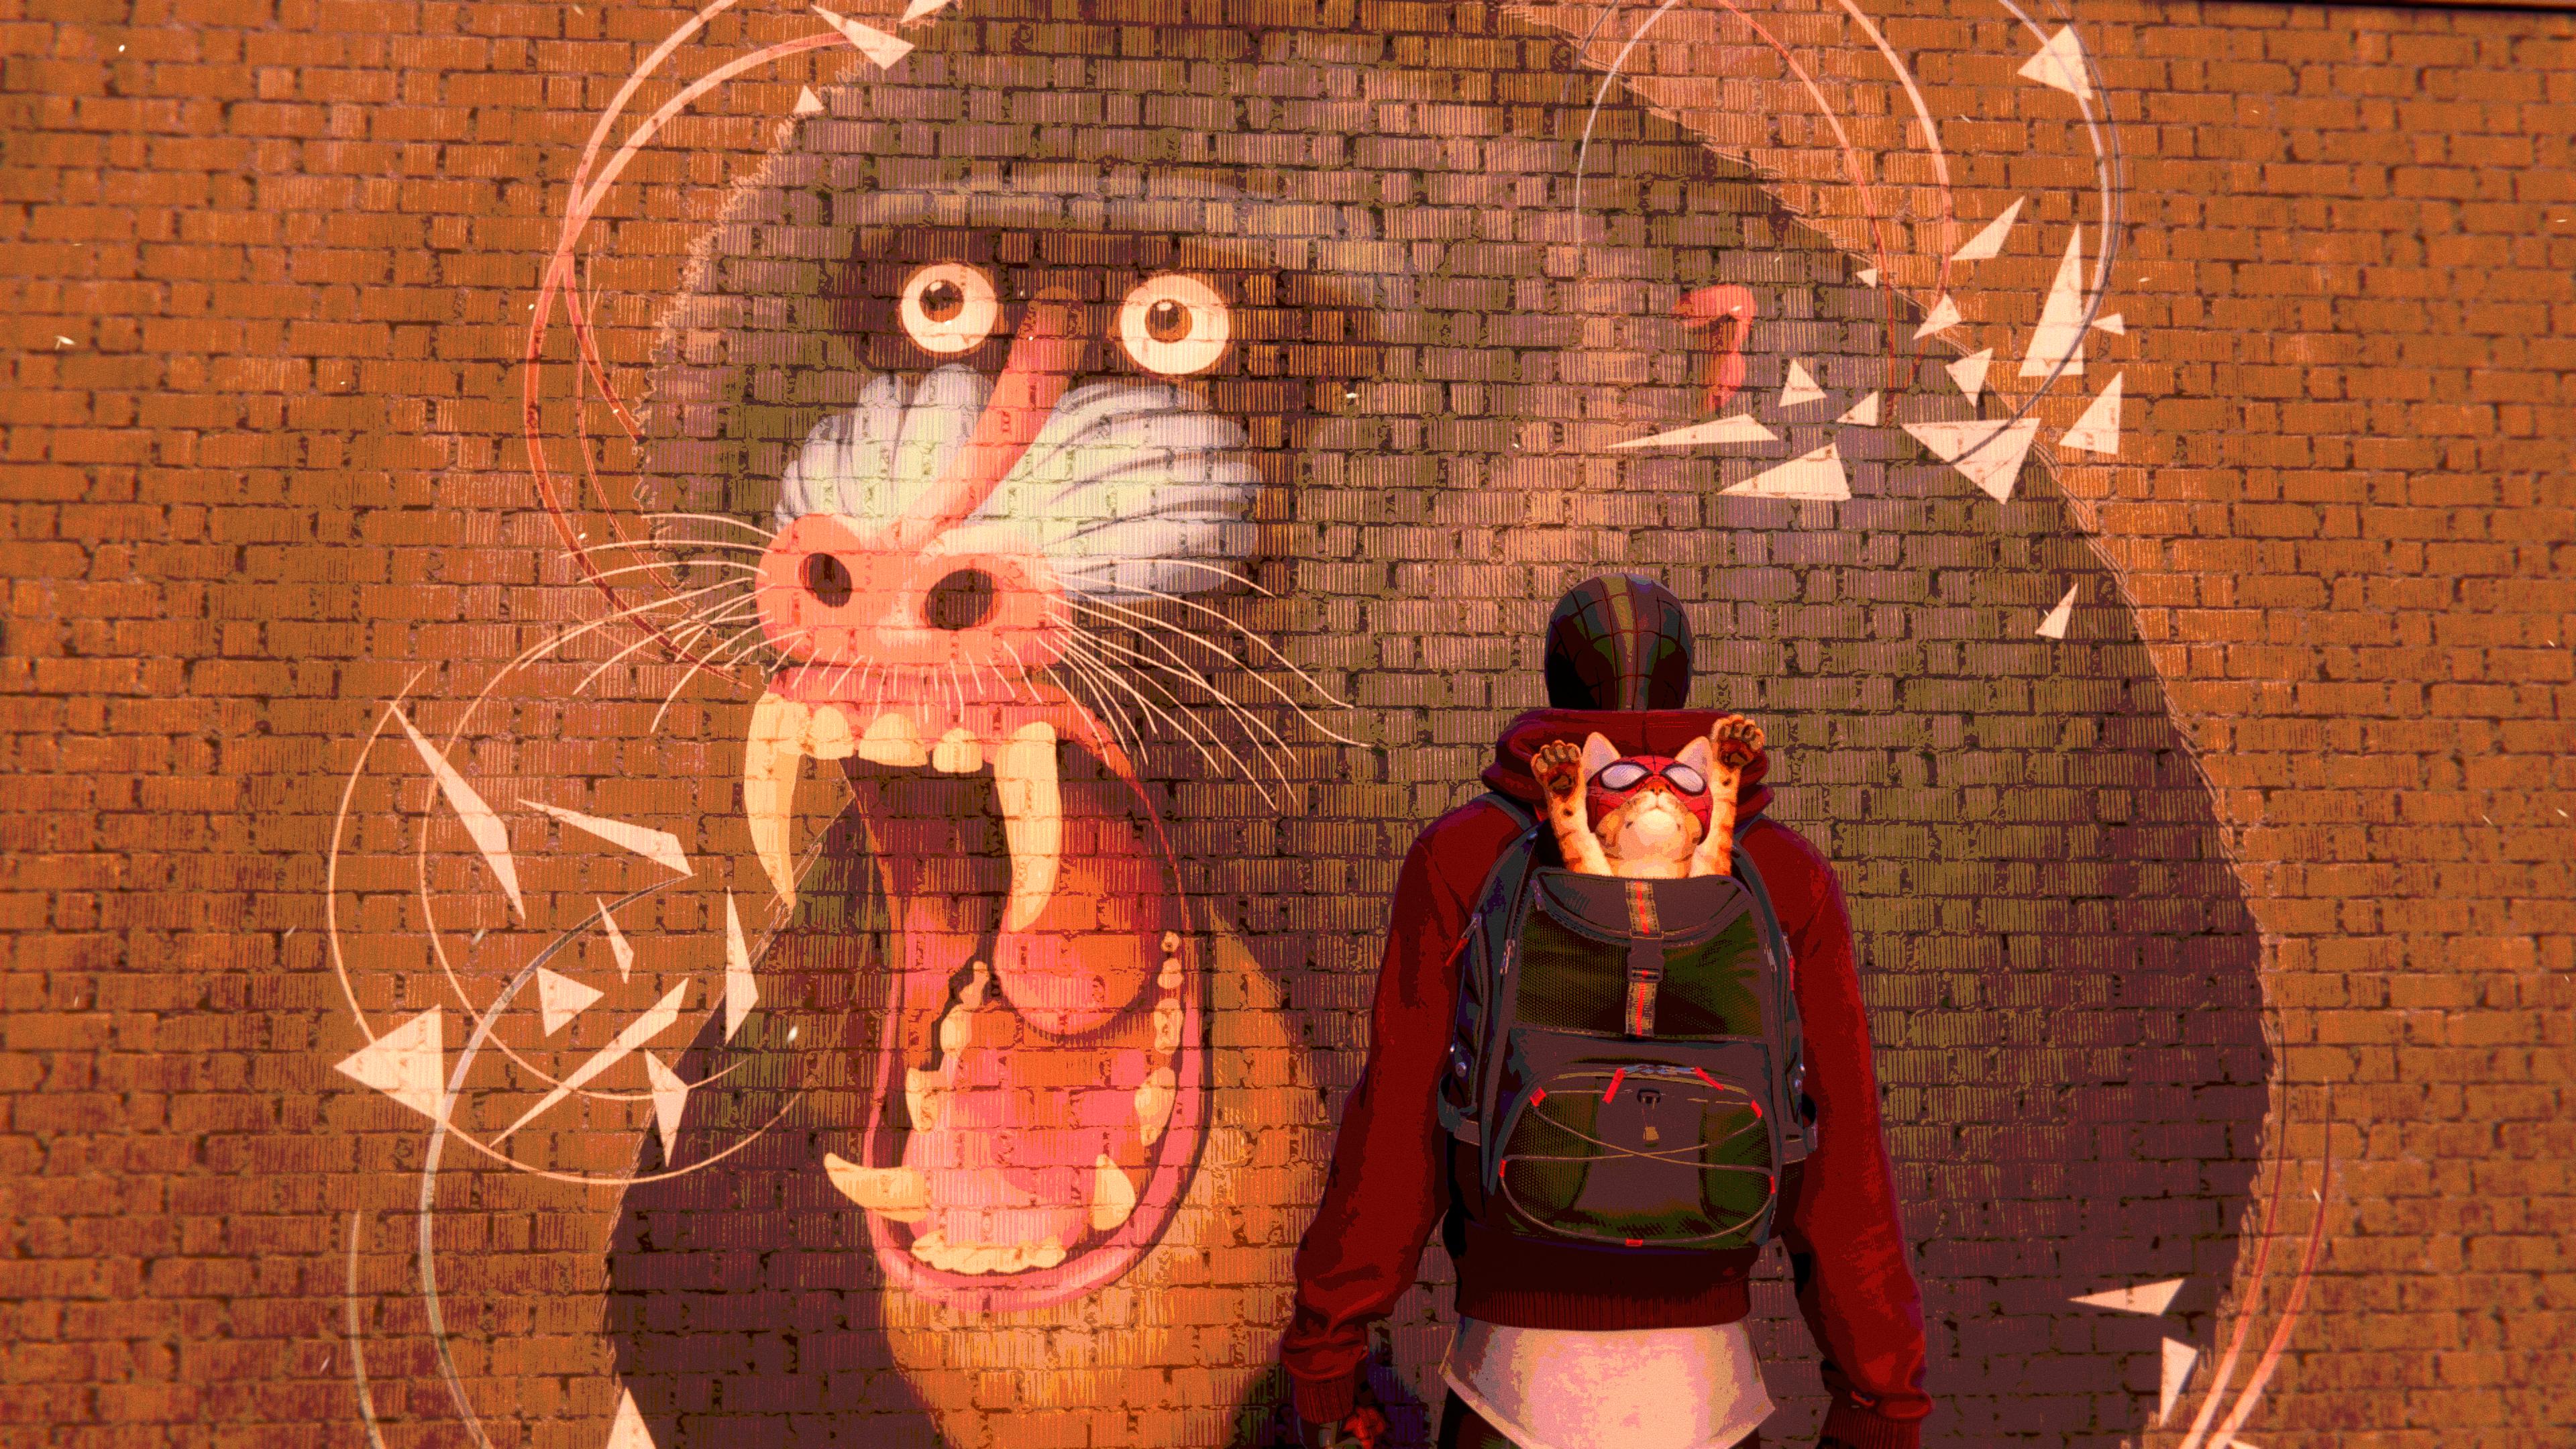 Miles Morales, in Spider-Man garb, with a backpack, out of which is emerging a cat in a mask, also named Spider-Man. They stand in front of a mural of a baboon baring its teeth.